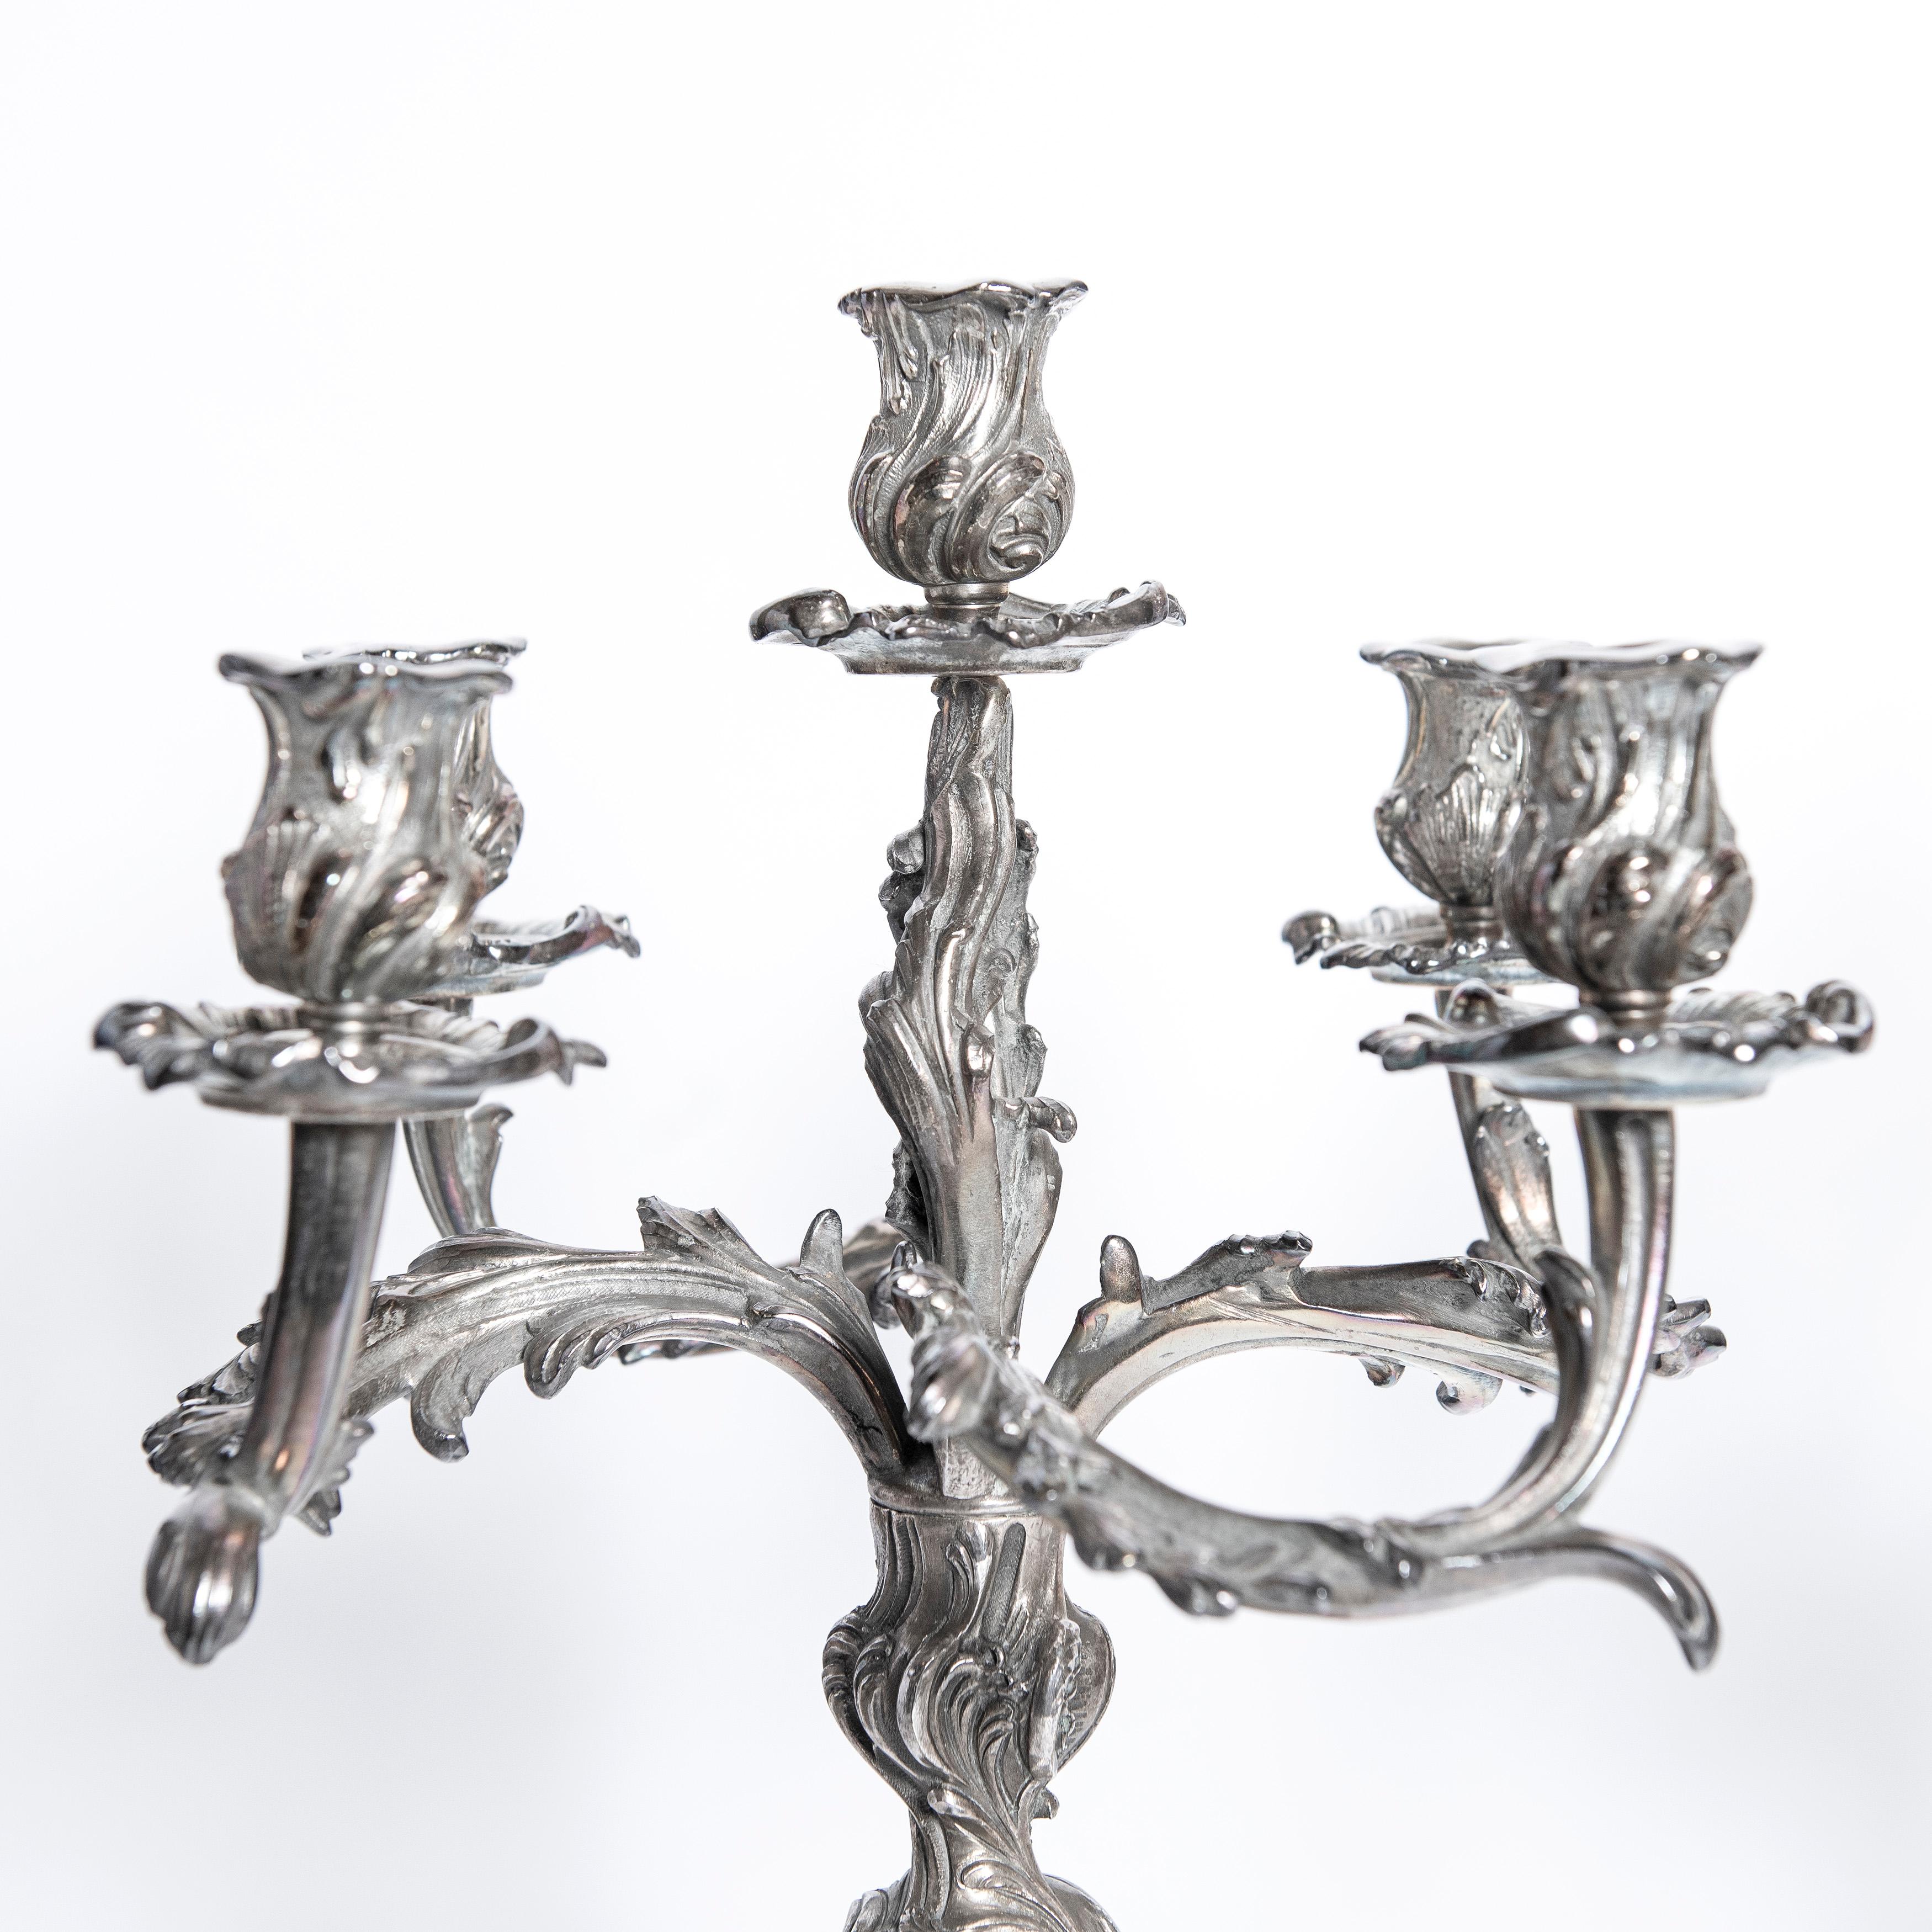 Pair of silver plate candelabras signed Christofle, France, early 20th century.